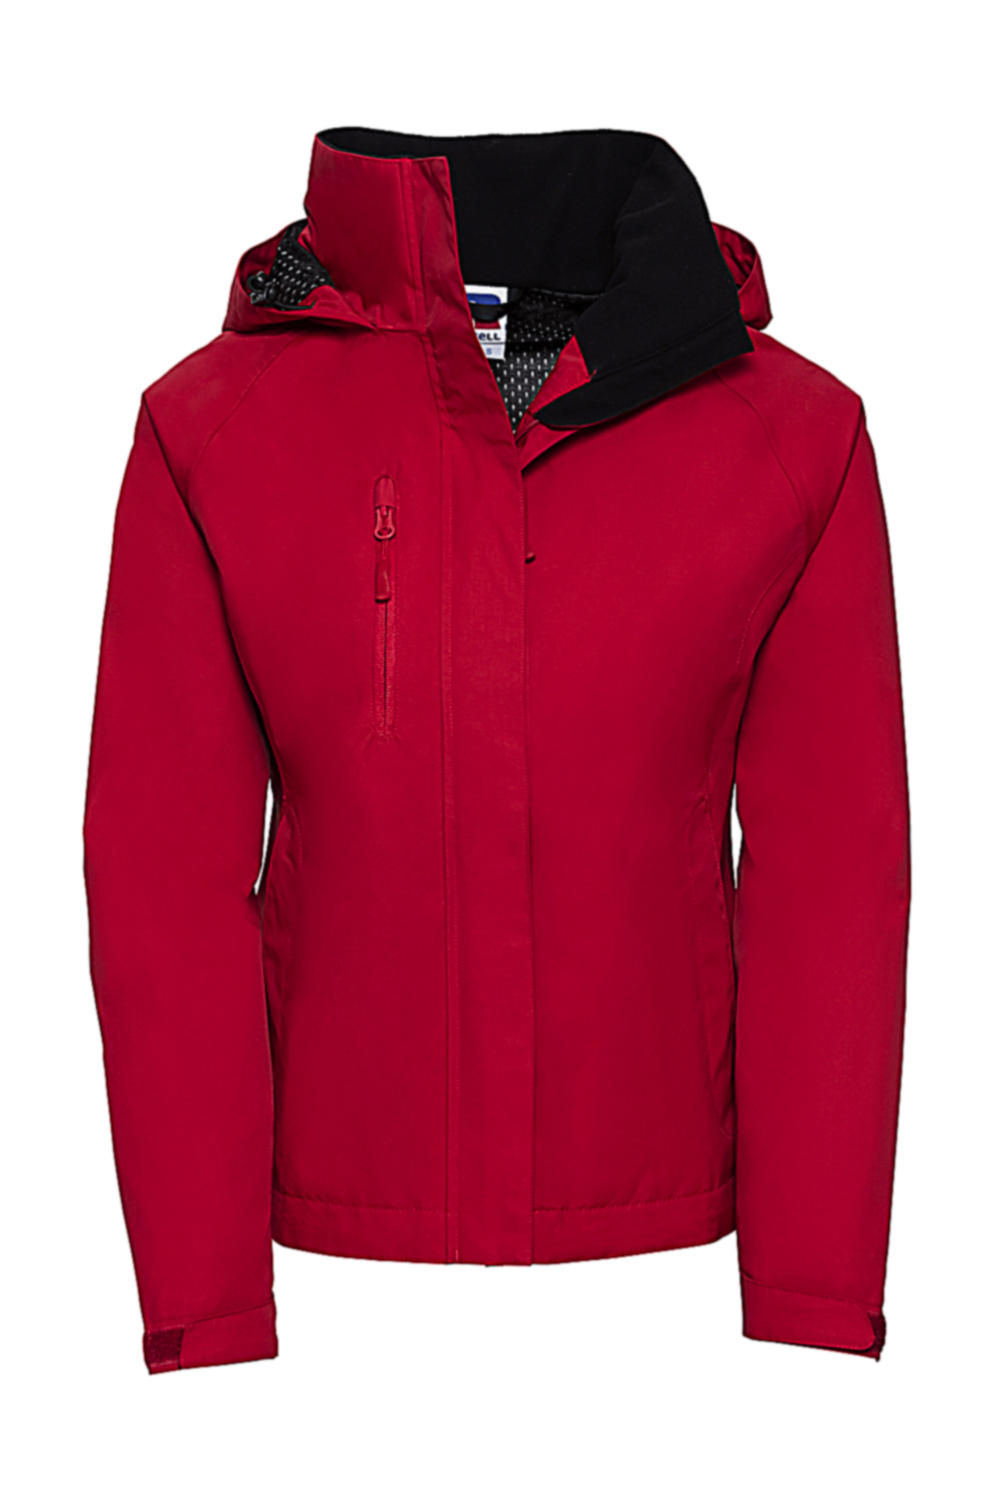  Ladies HydraPlus 2000 Jacket in Farbe Classic Red